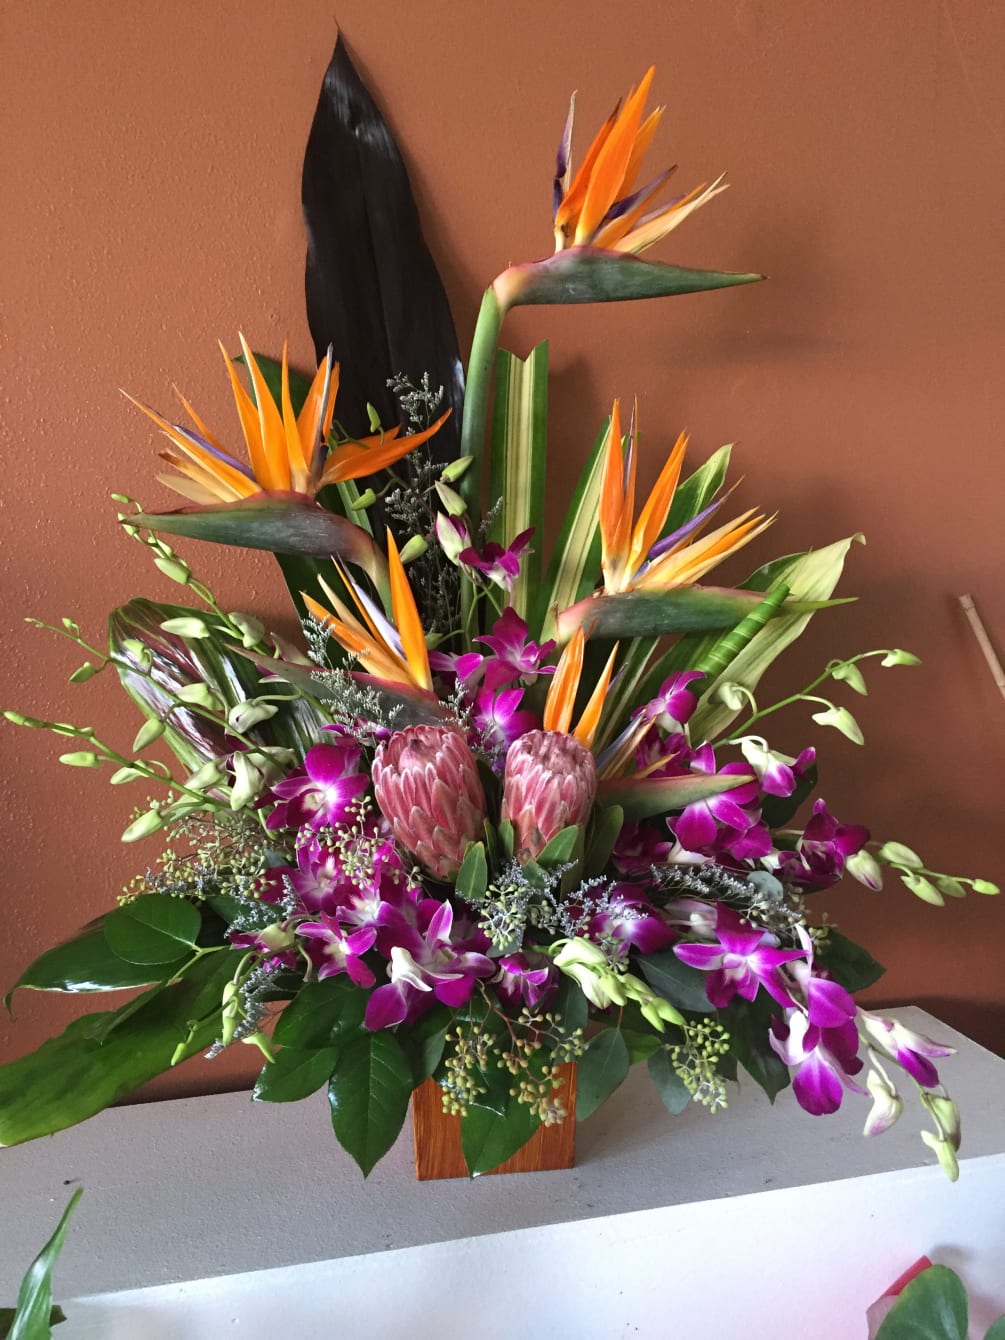 Arrangement
SUBSTITUTION POLICY &ndash; Always deliver the freshest flowers!
Please note the bouquet pictured